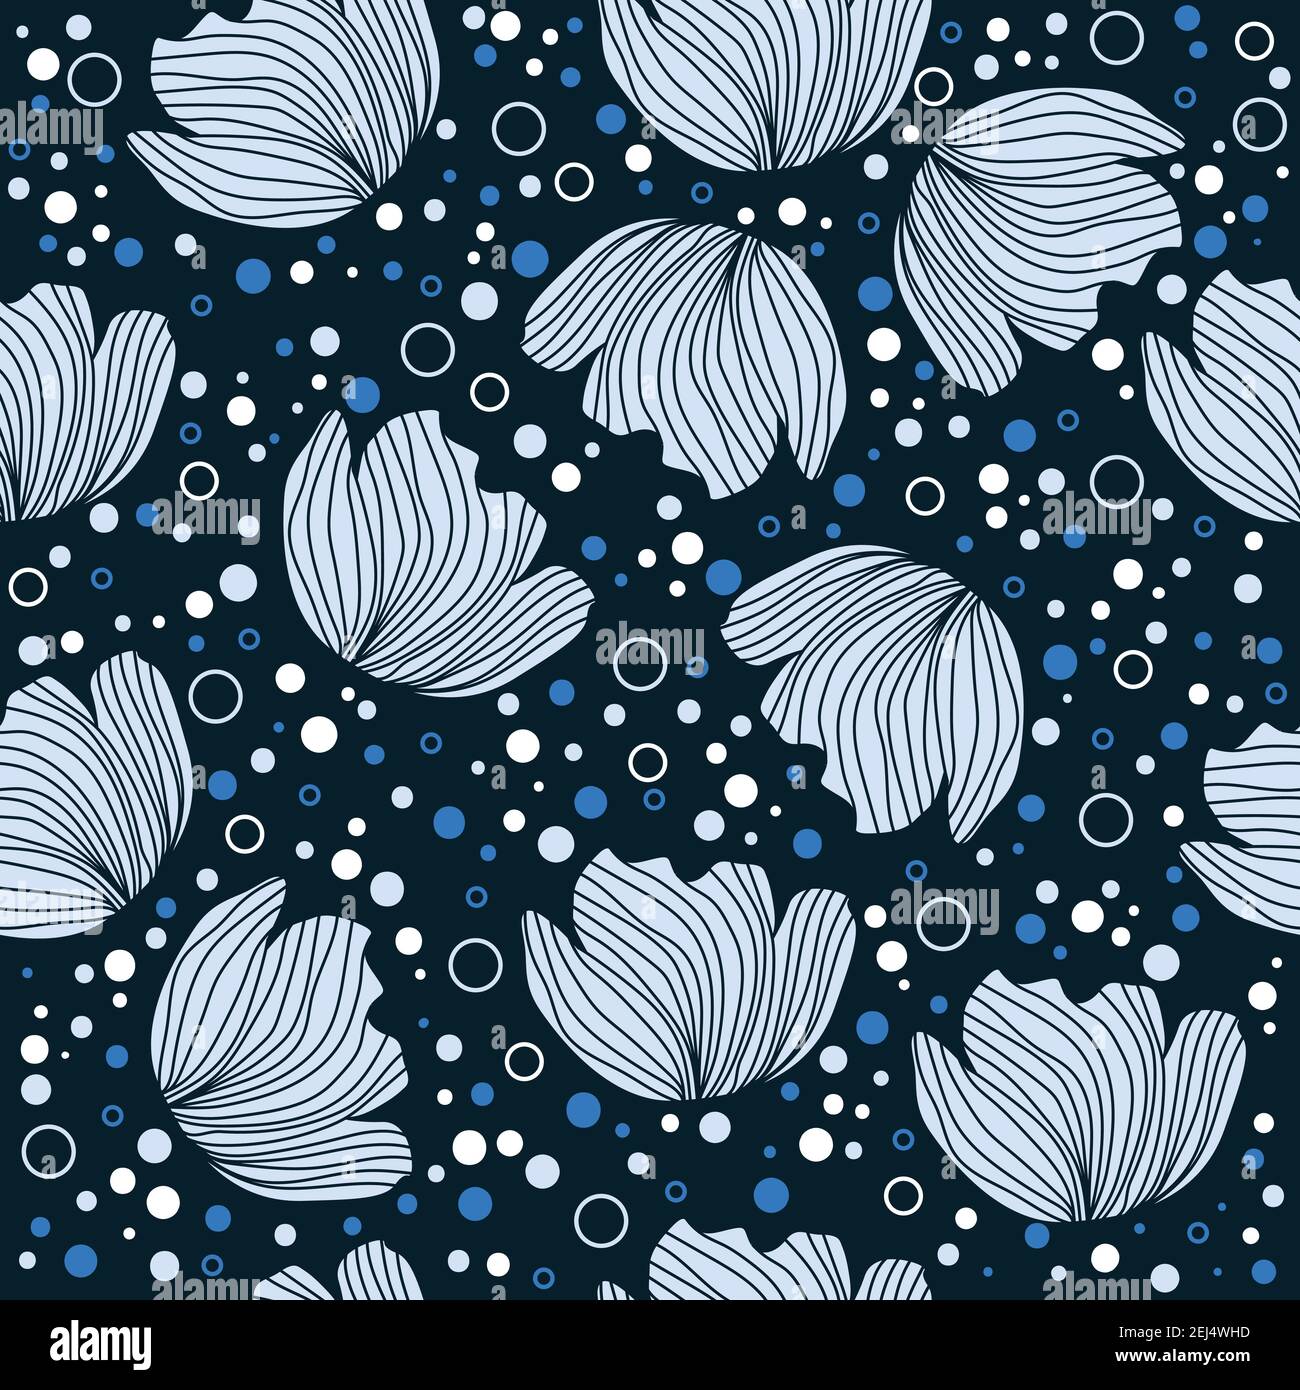 Floral pattern design with flower silhouettes, dots and small circles on a dark blue background Stock Vector